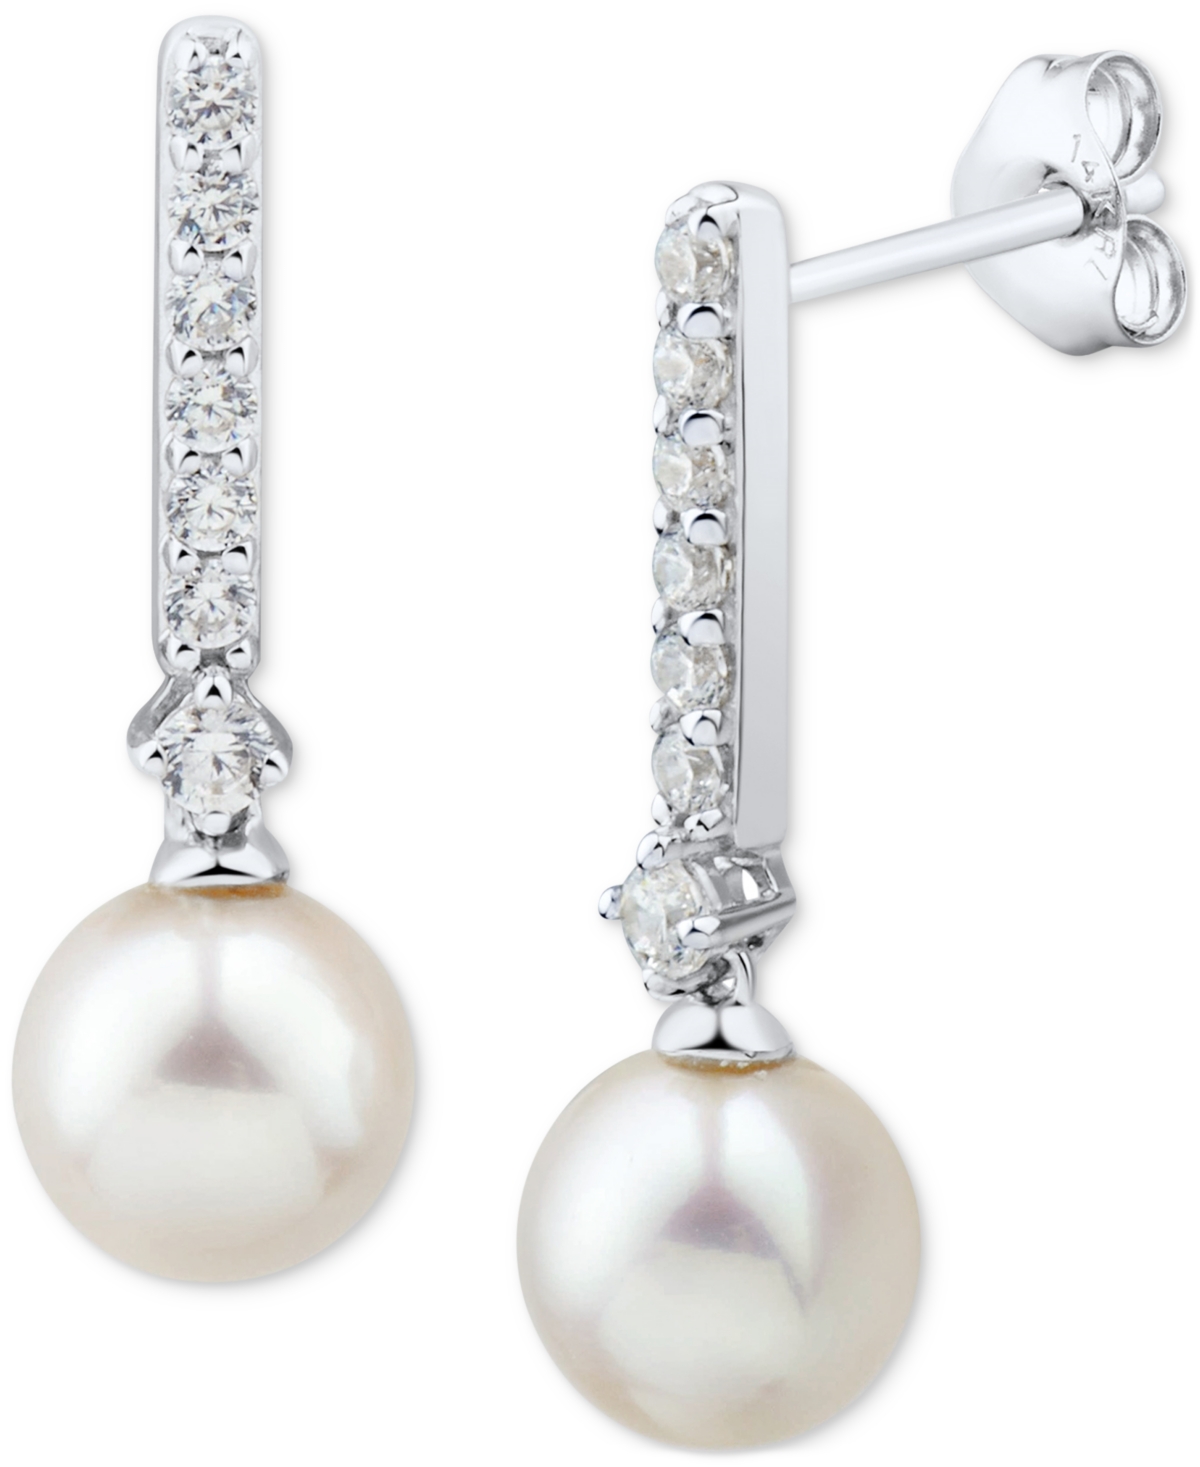 Cultured Freshwater Pearl (6mm) & Diamond (1/5 ct. t.w.) Drop Earrings in 14k White Gold - White Gold